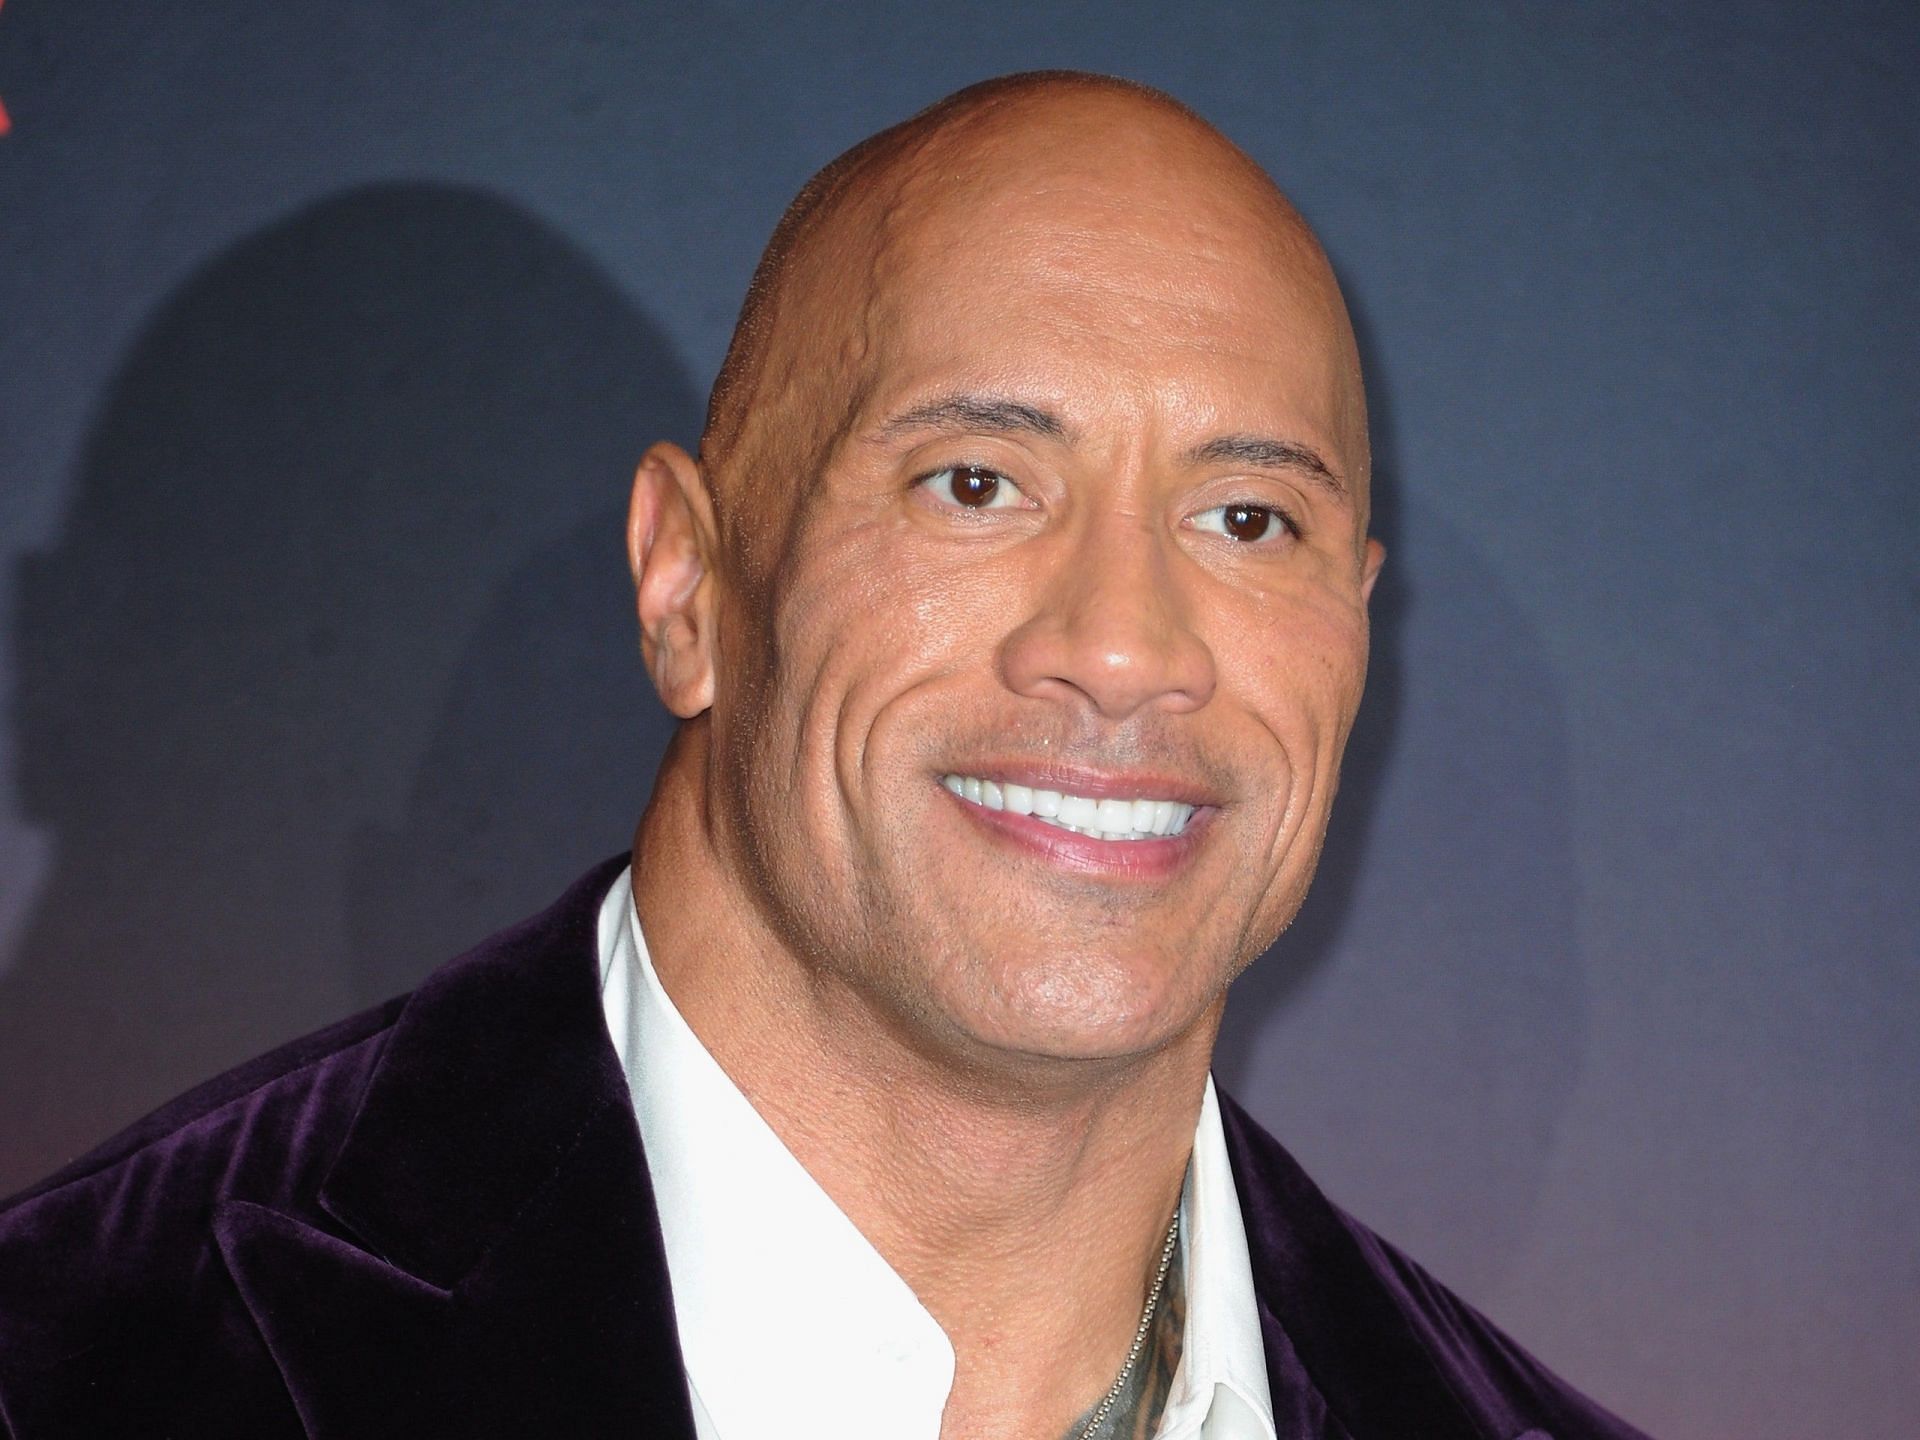 Dwayne 'The Rock' Johnson is 'aware' he might potentially become a